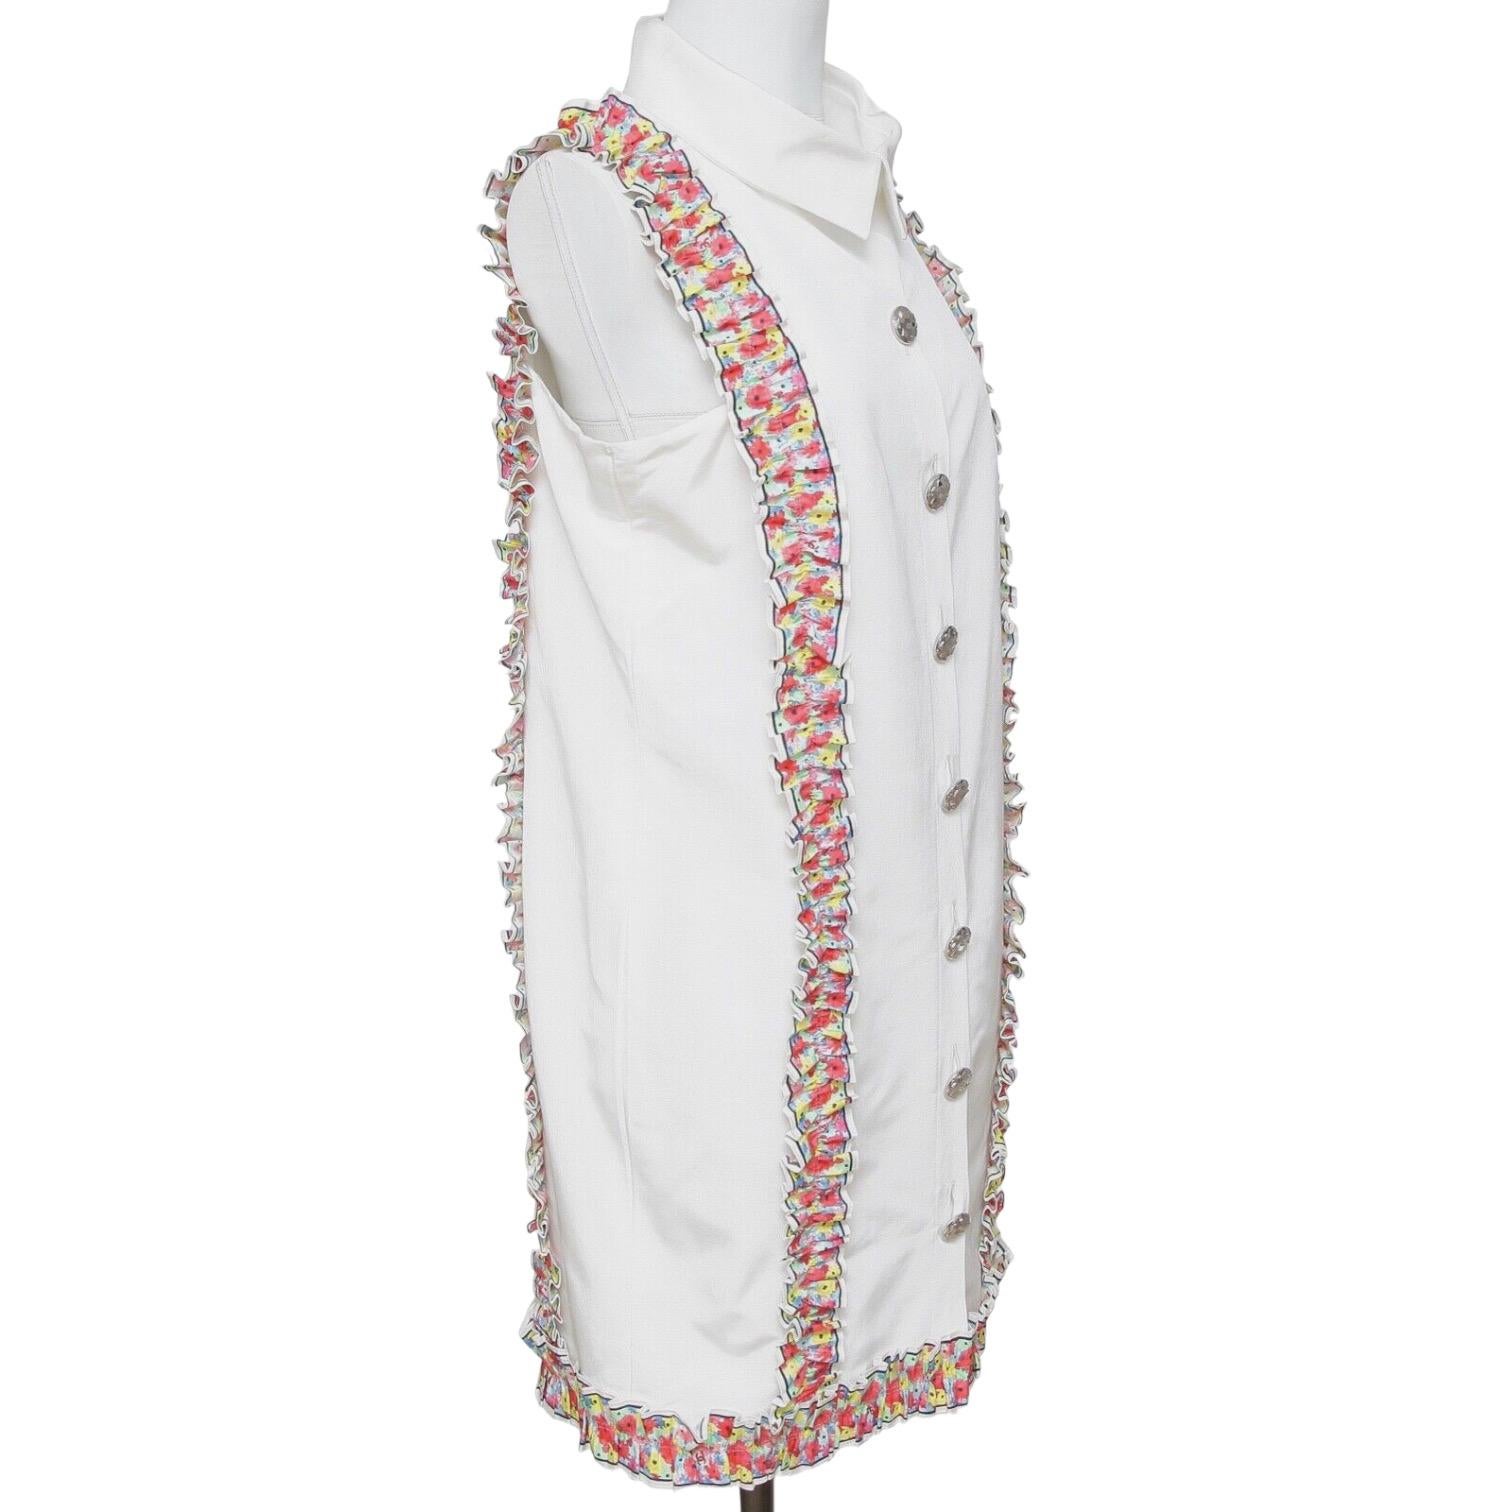 GUARANTEED AUTHENTIC BEAUTIFUL CHANEL RUNWAY SPRING 2016 SLEEVLESS FLORAL TRIM DRESS

Retail excluding sales taxes $3,900


Design:
- Runway beautiful sleeveless white dress with multicolor ruffle floral print trim.
- Silver-tone button closure.
-